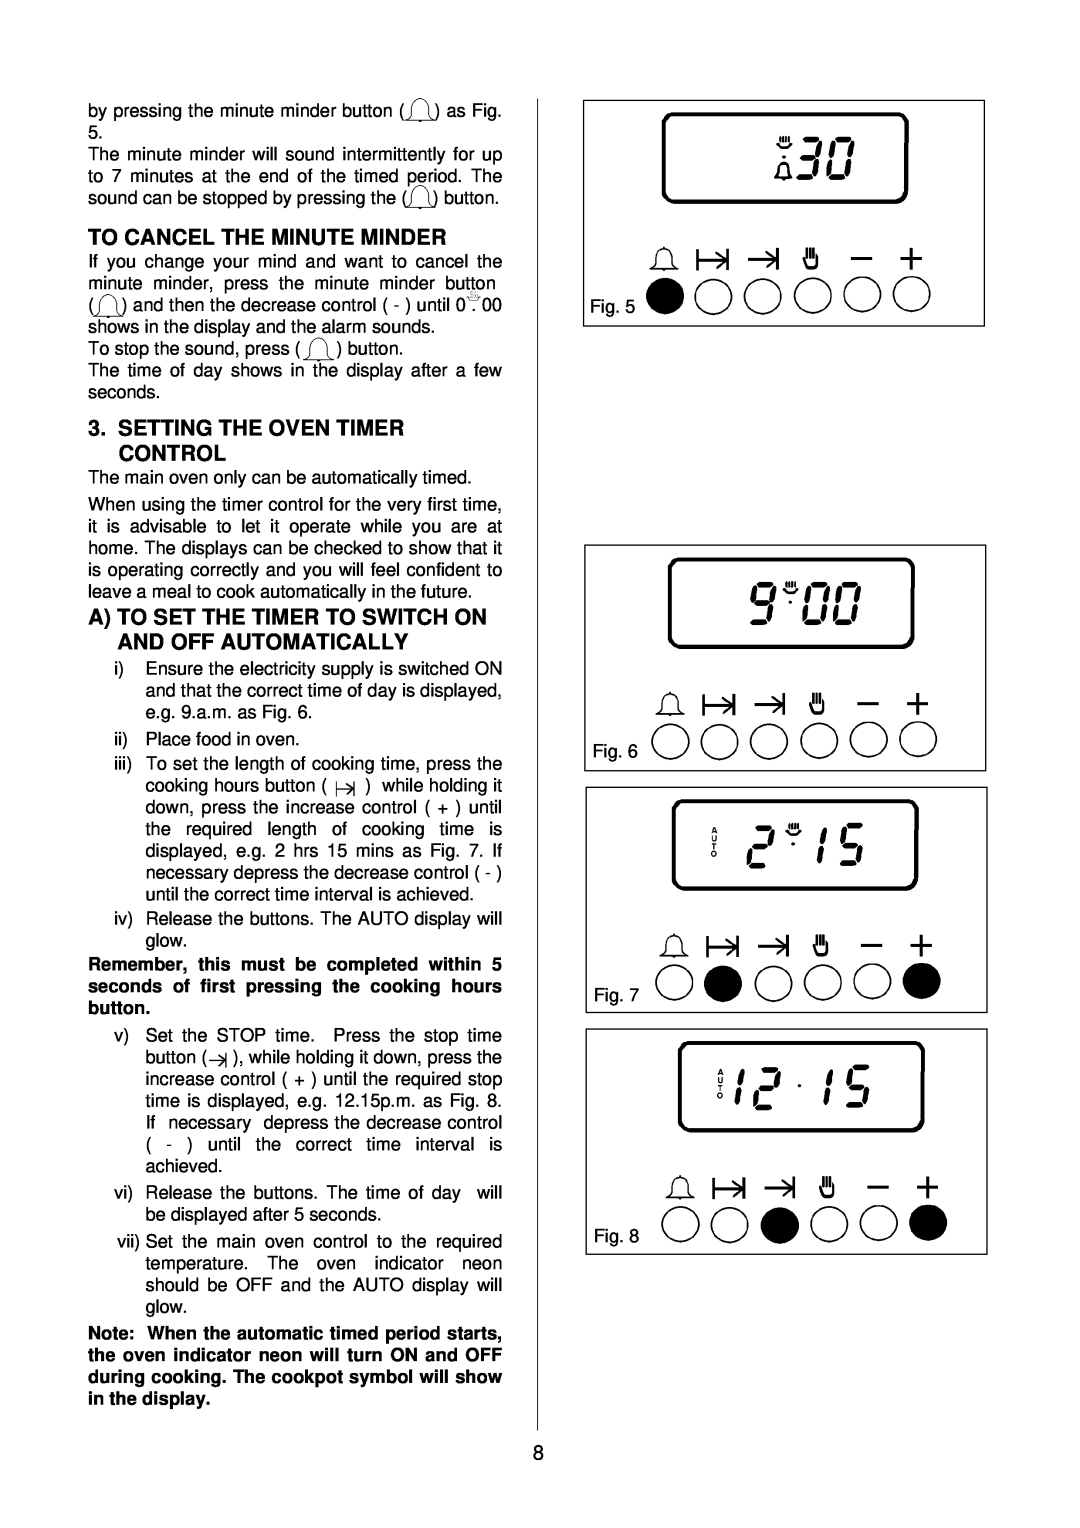 Electrolux D2160 installation instructions To Cancel The Minute Minder, Setting The Oven Timer Control 